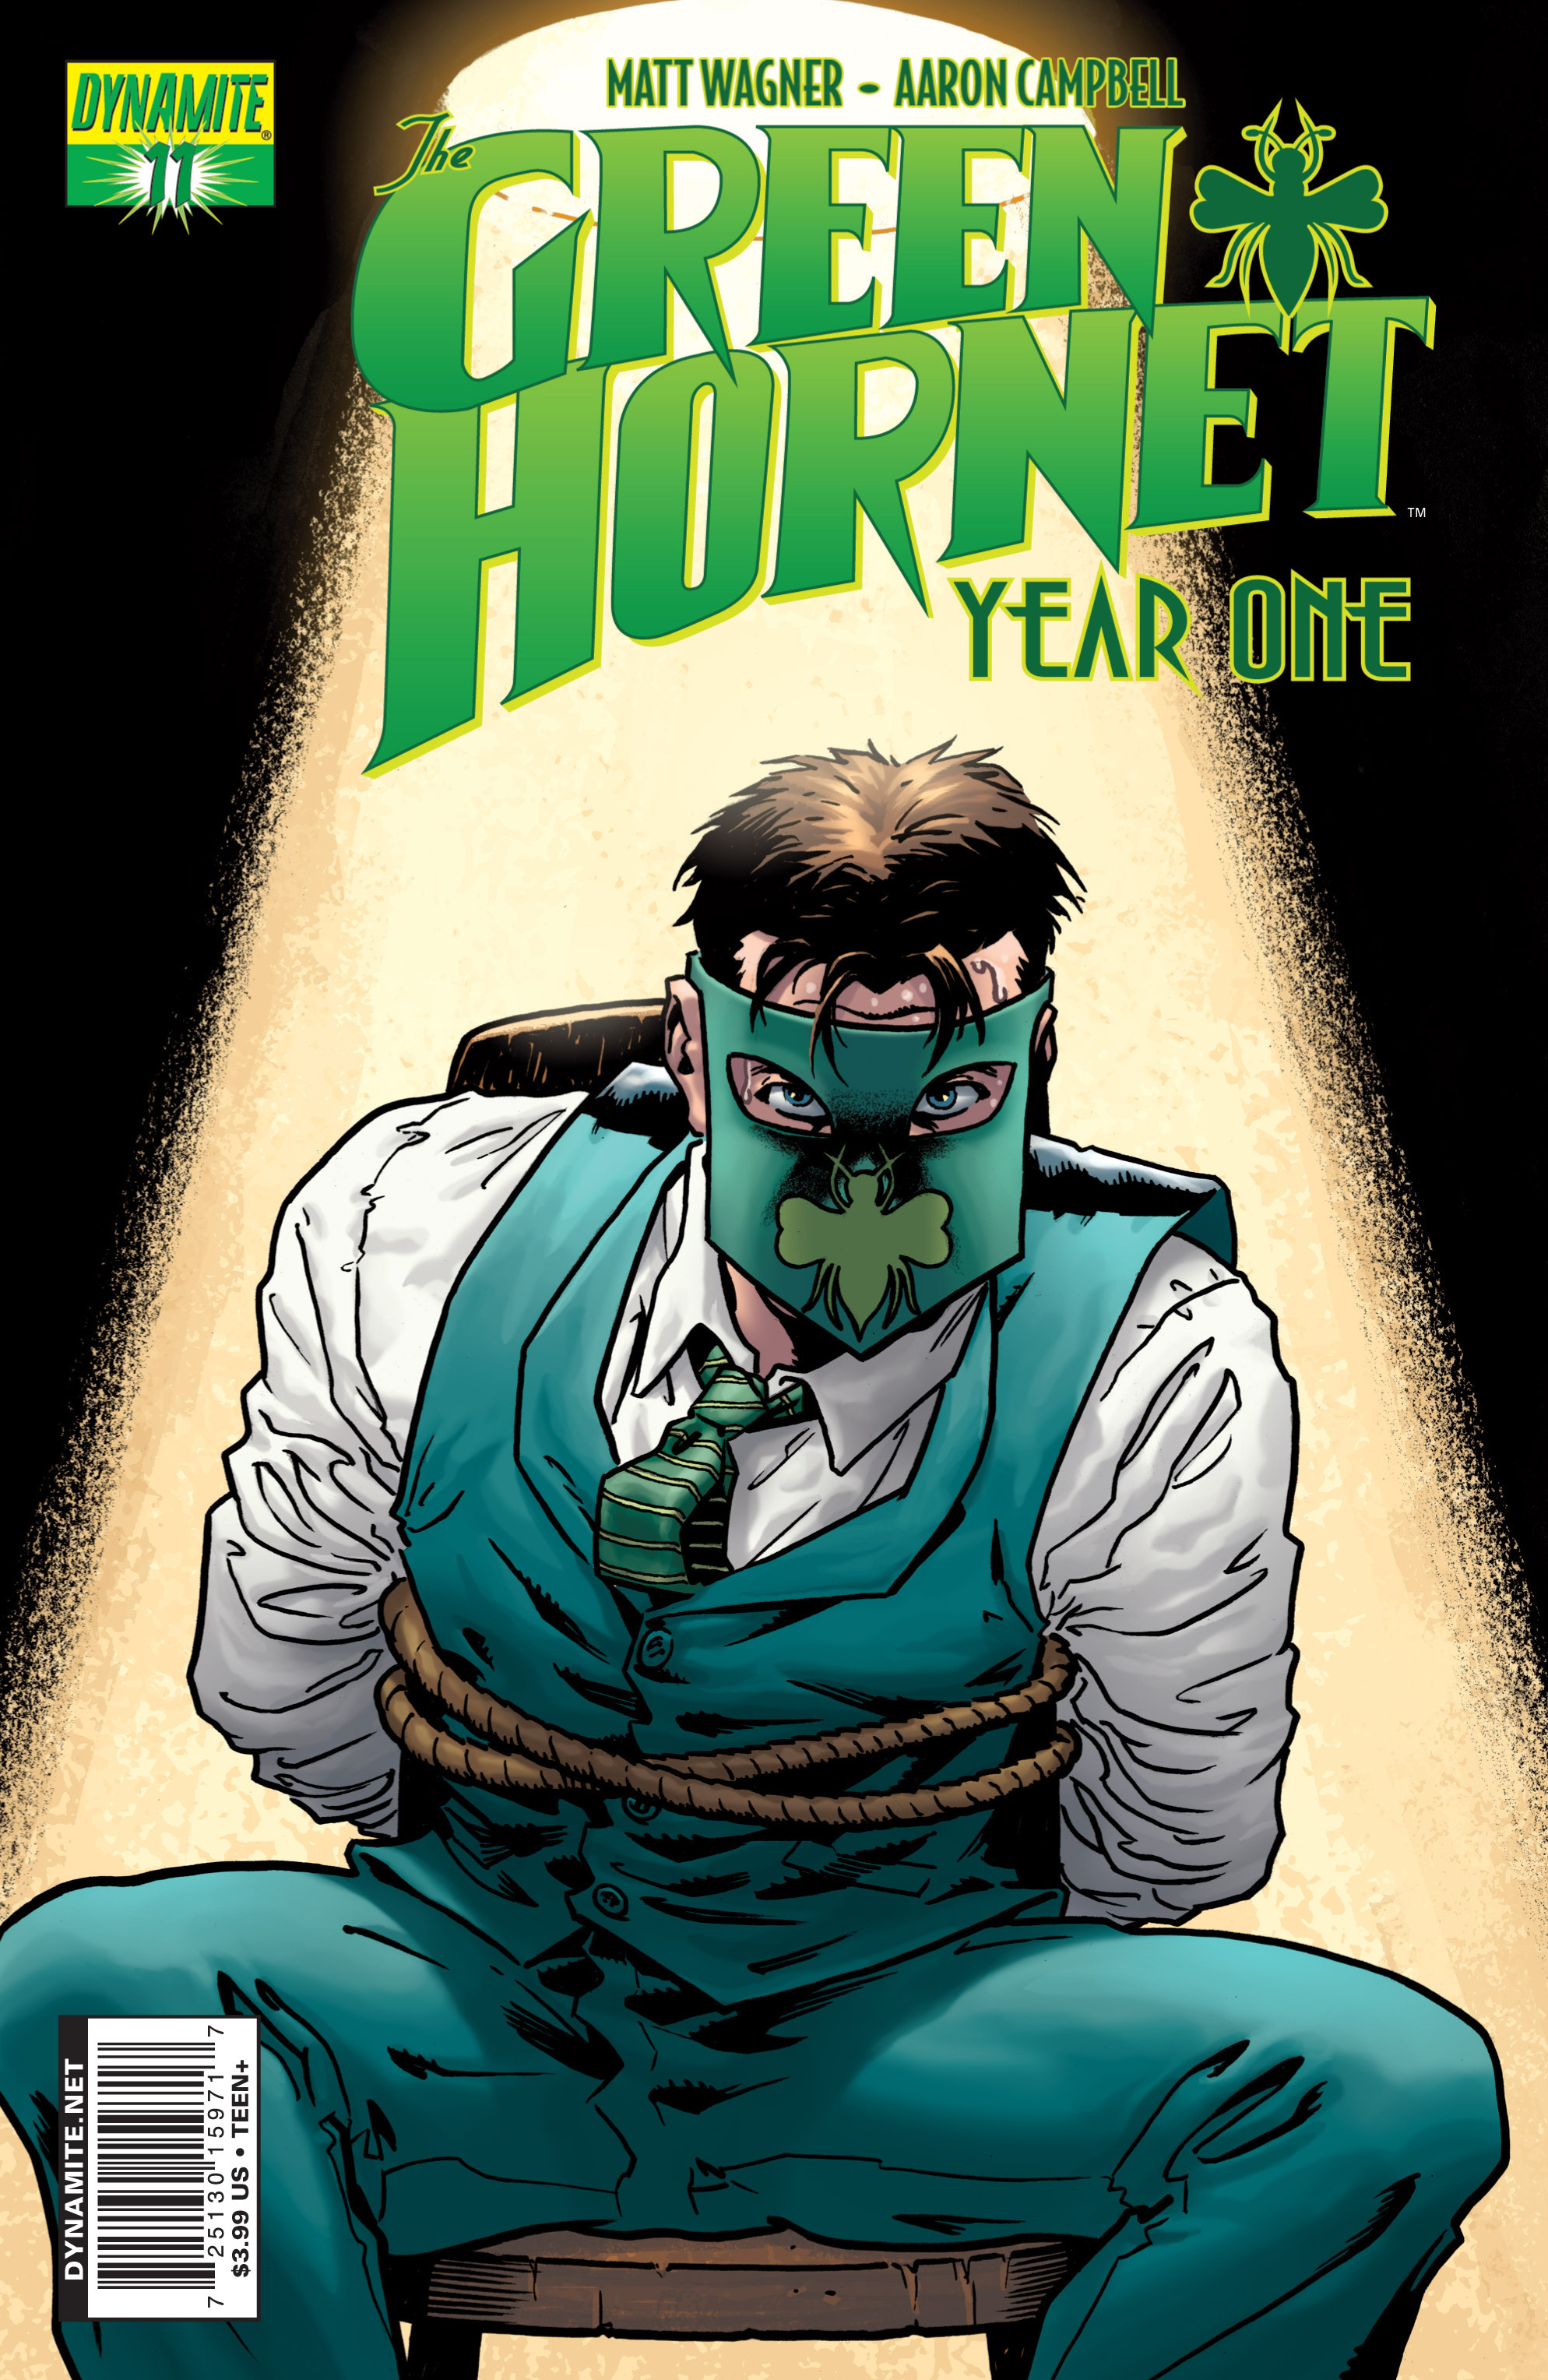 Read online Green Hornet: Year One comic -  Issue #11 - 2